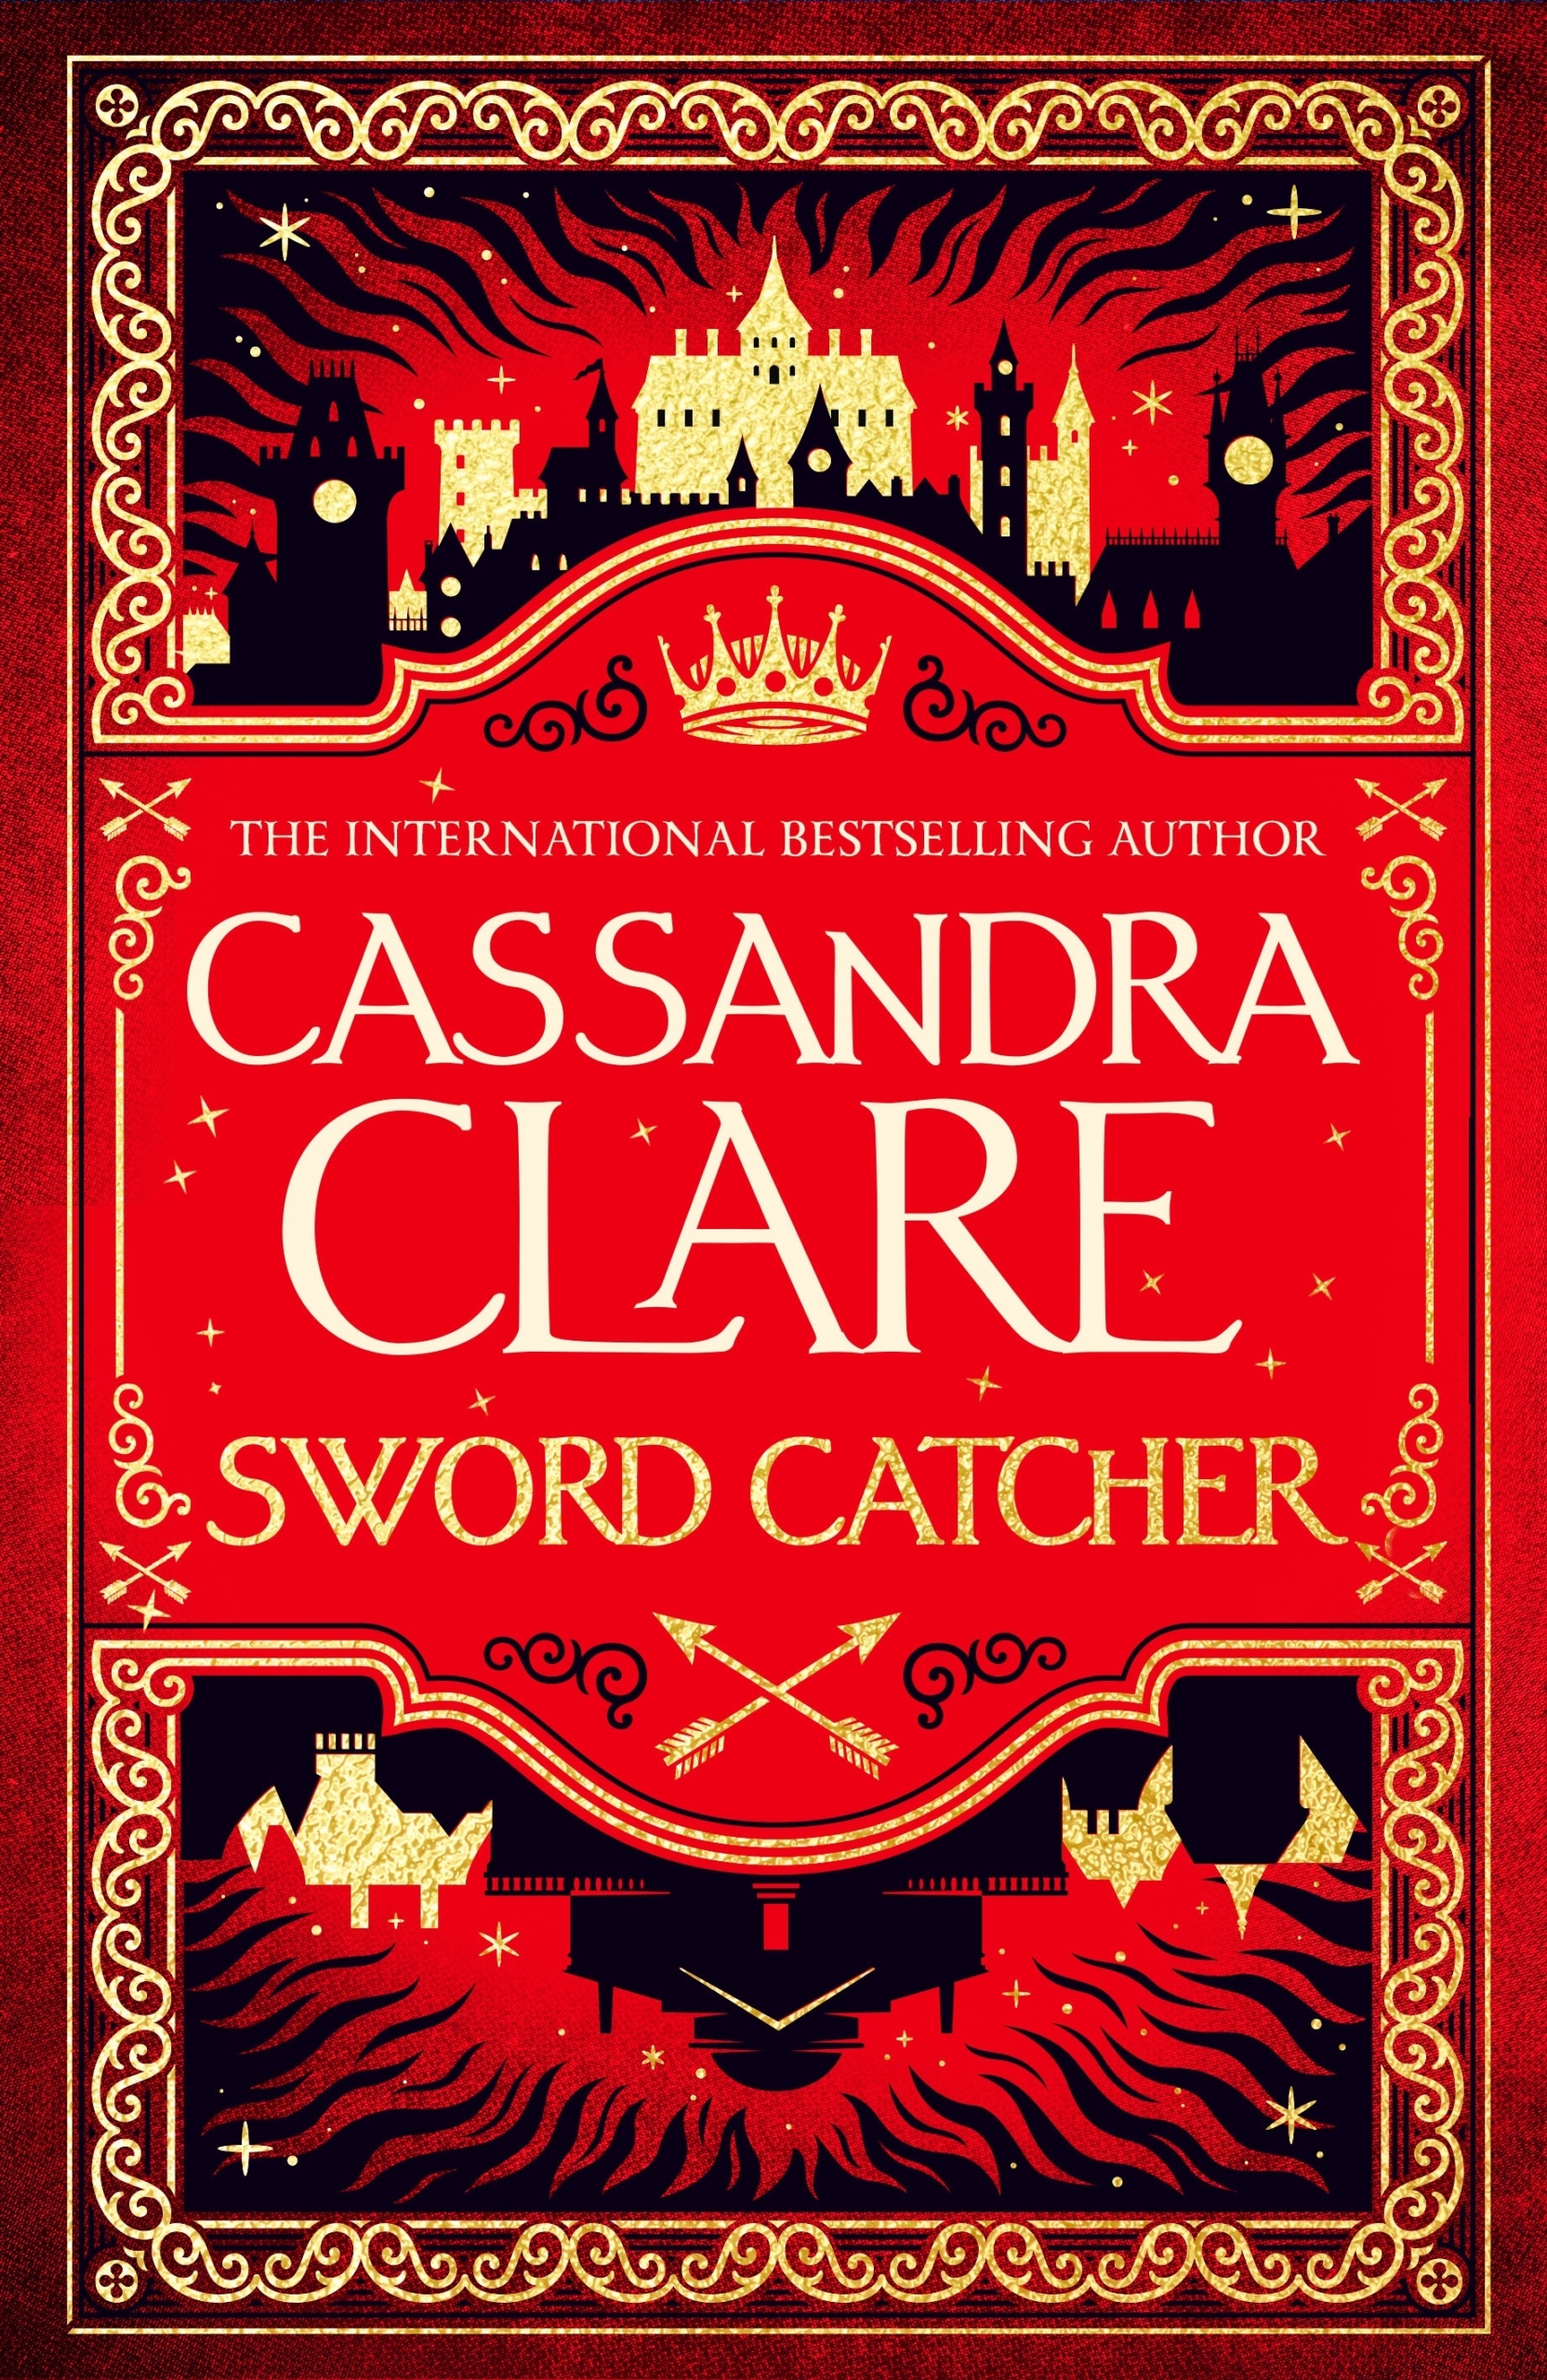 Sword Catcher review: Detailed fantasy in new Cassandra Clare book series